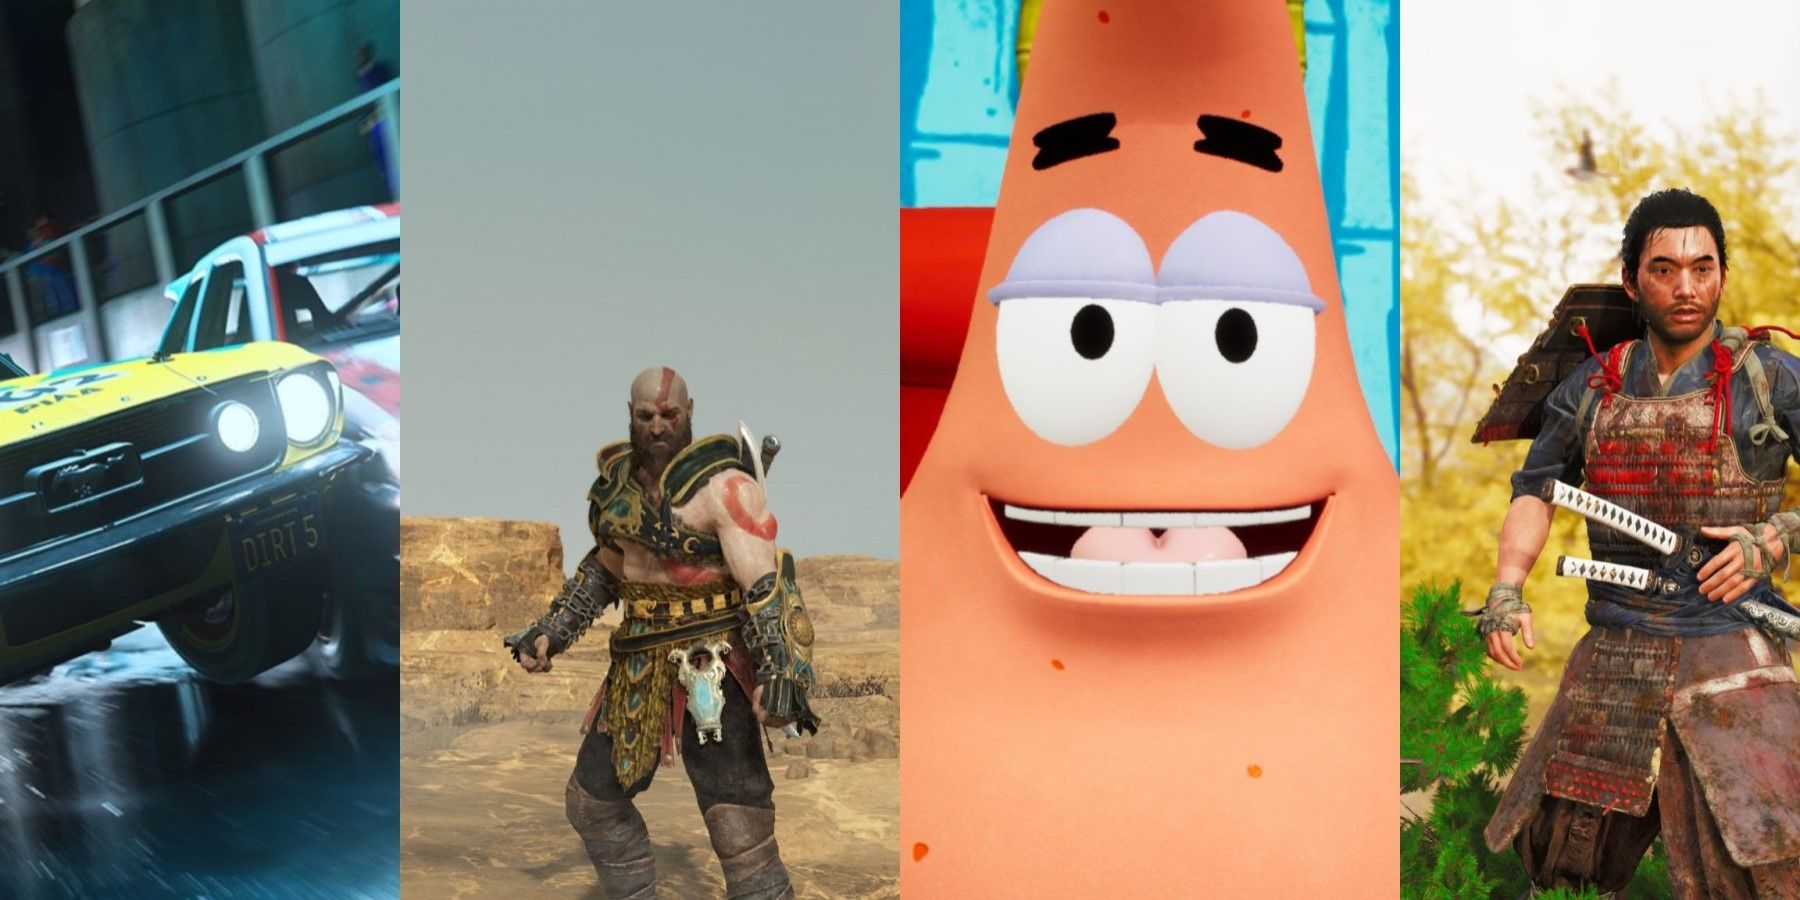 Sony PlayStation Plus shared the list of free games for April 2022  including Hood and SpongeBob